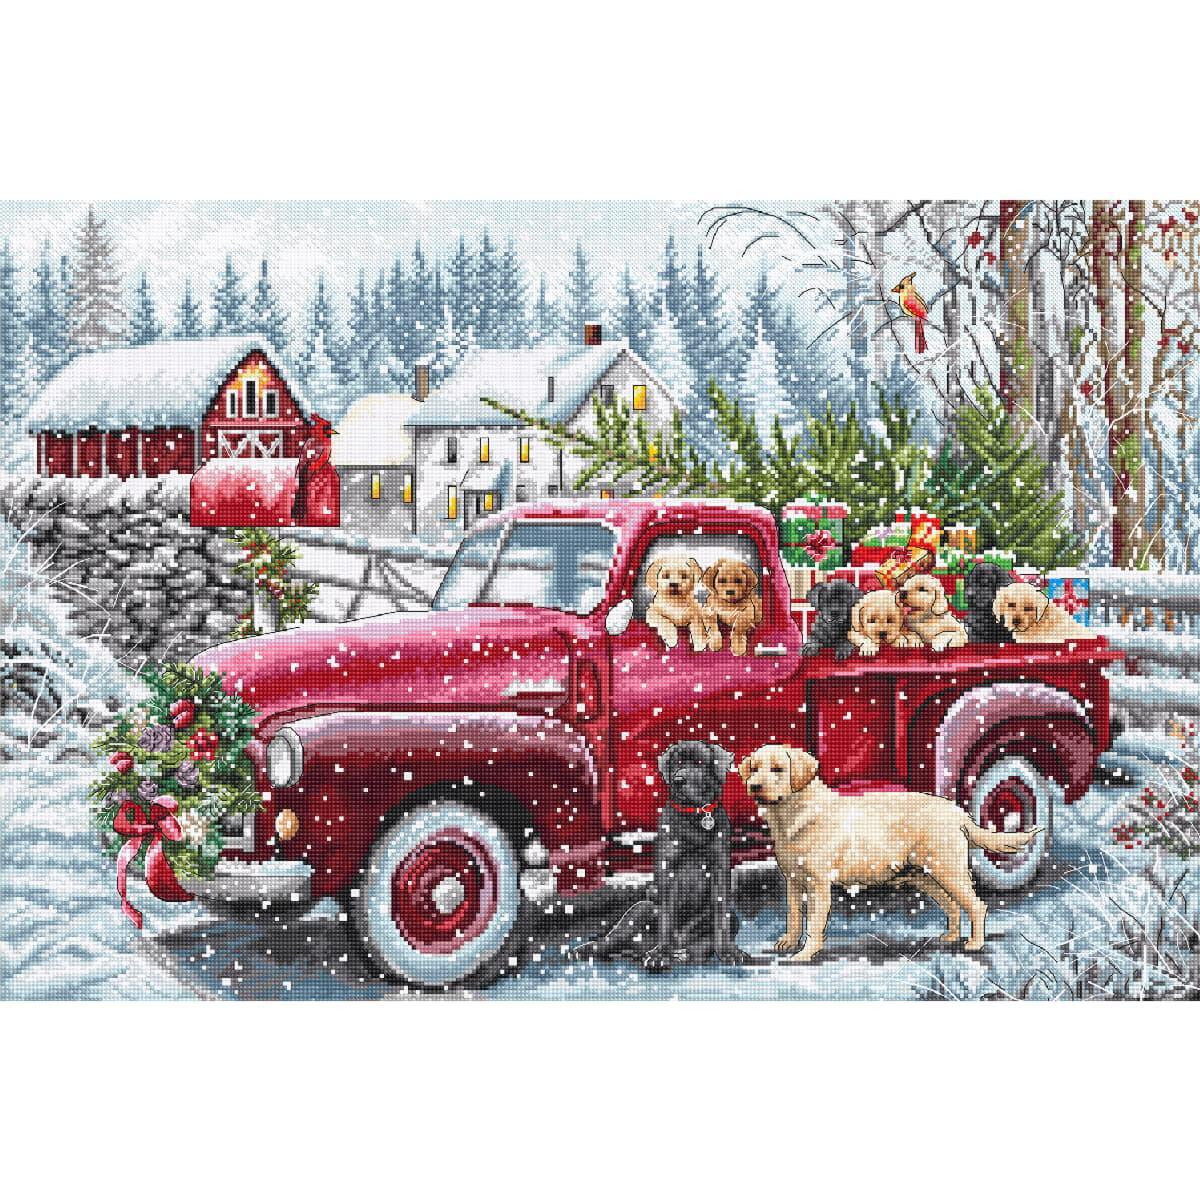 A red vintage truck full of puppies and Christmas...